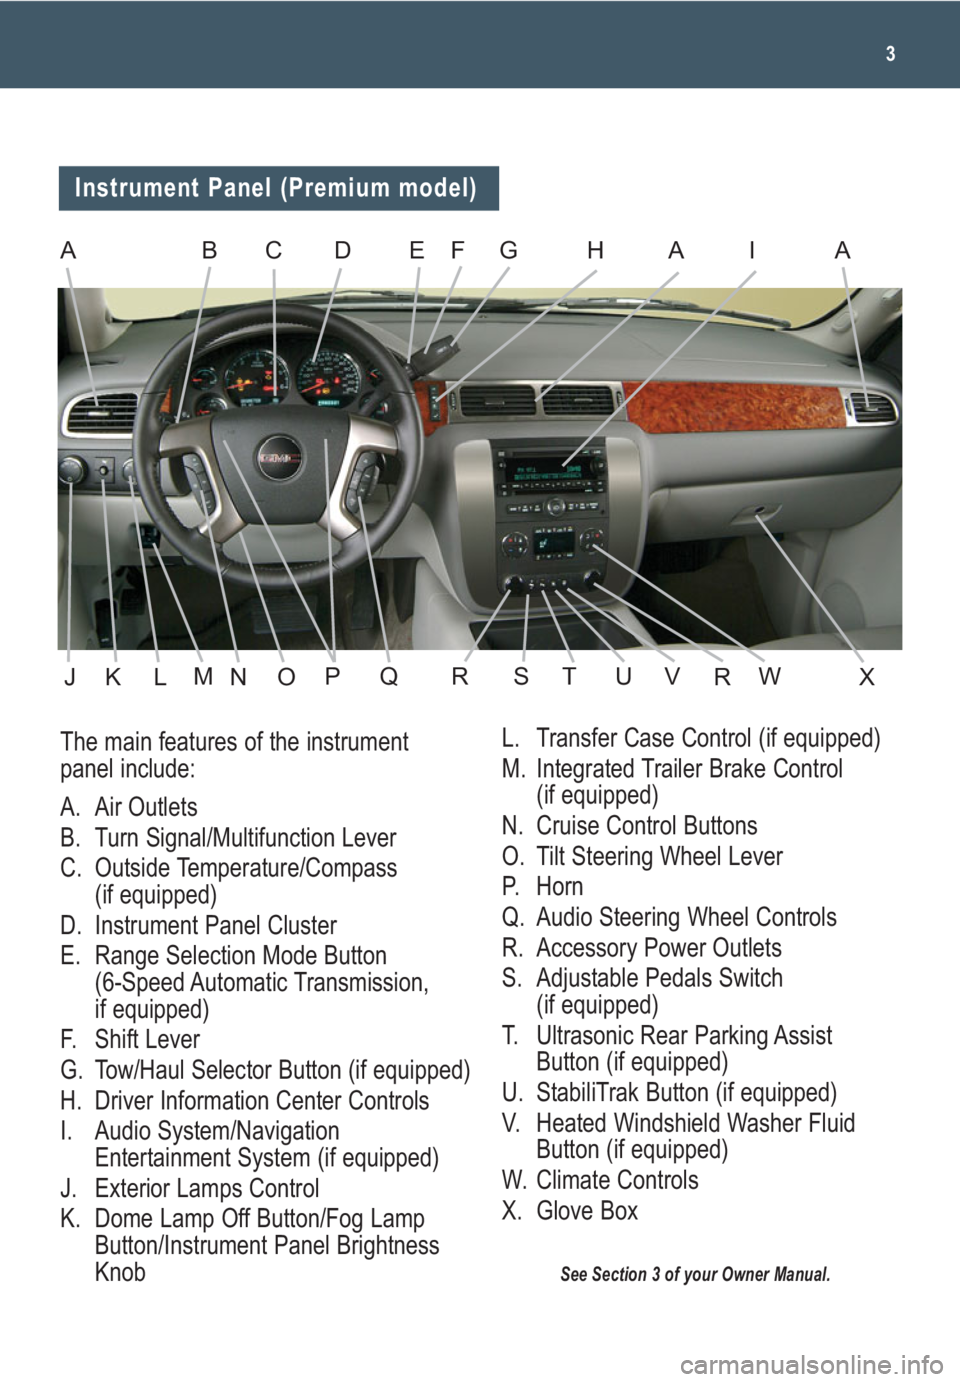 GMC SIERRA 2009  Get To Know Guide 3
See Section 3 of your Owner Manual.
The main features of the instrument 
panel include:
A. Air Outlets
B. Turn Signal/Multifunction Lever
C. Outside Temperature/Compass
(if equipped)
D. Instrument P